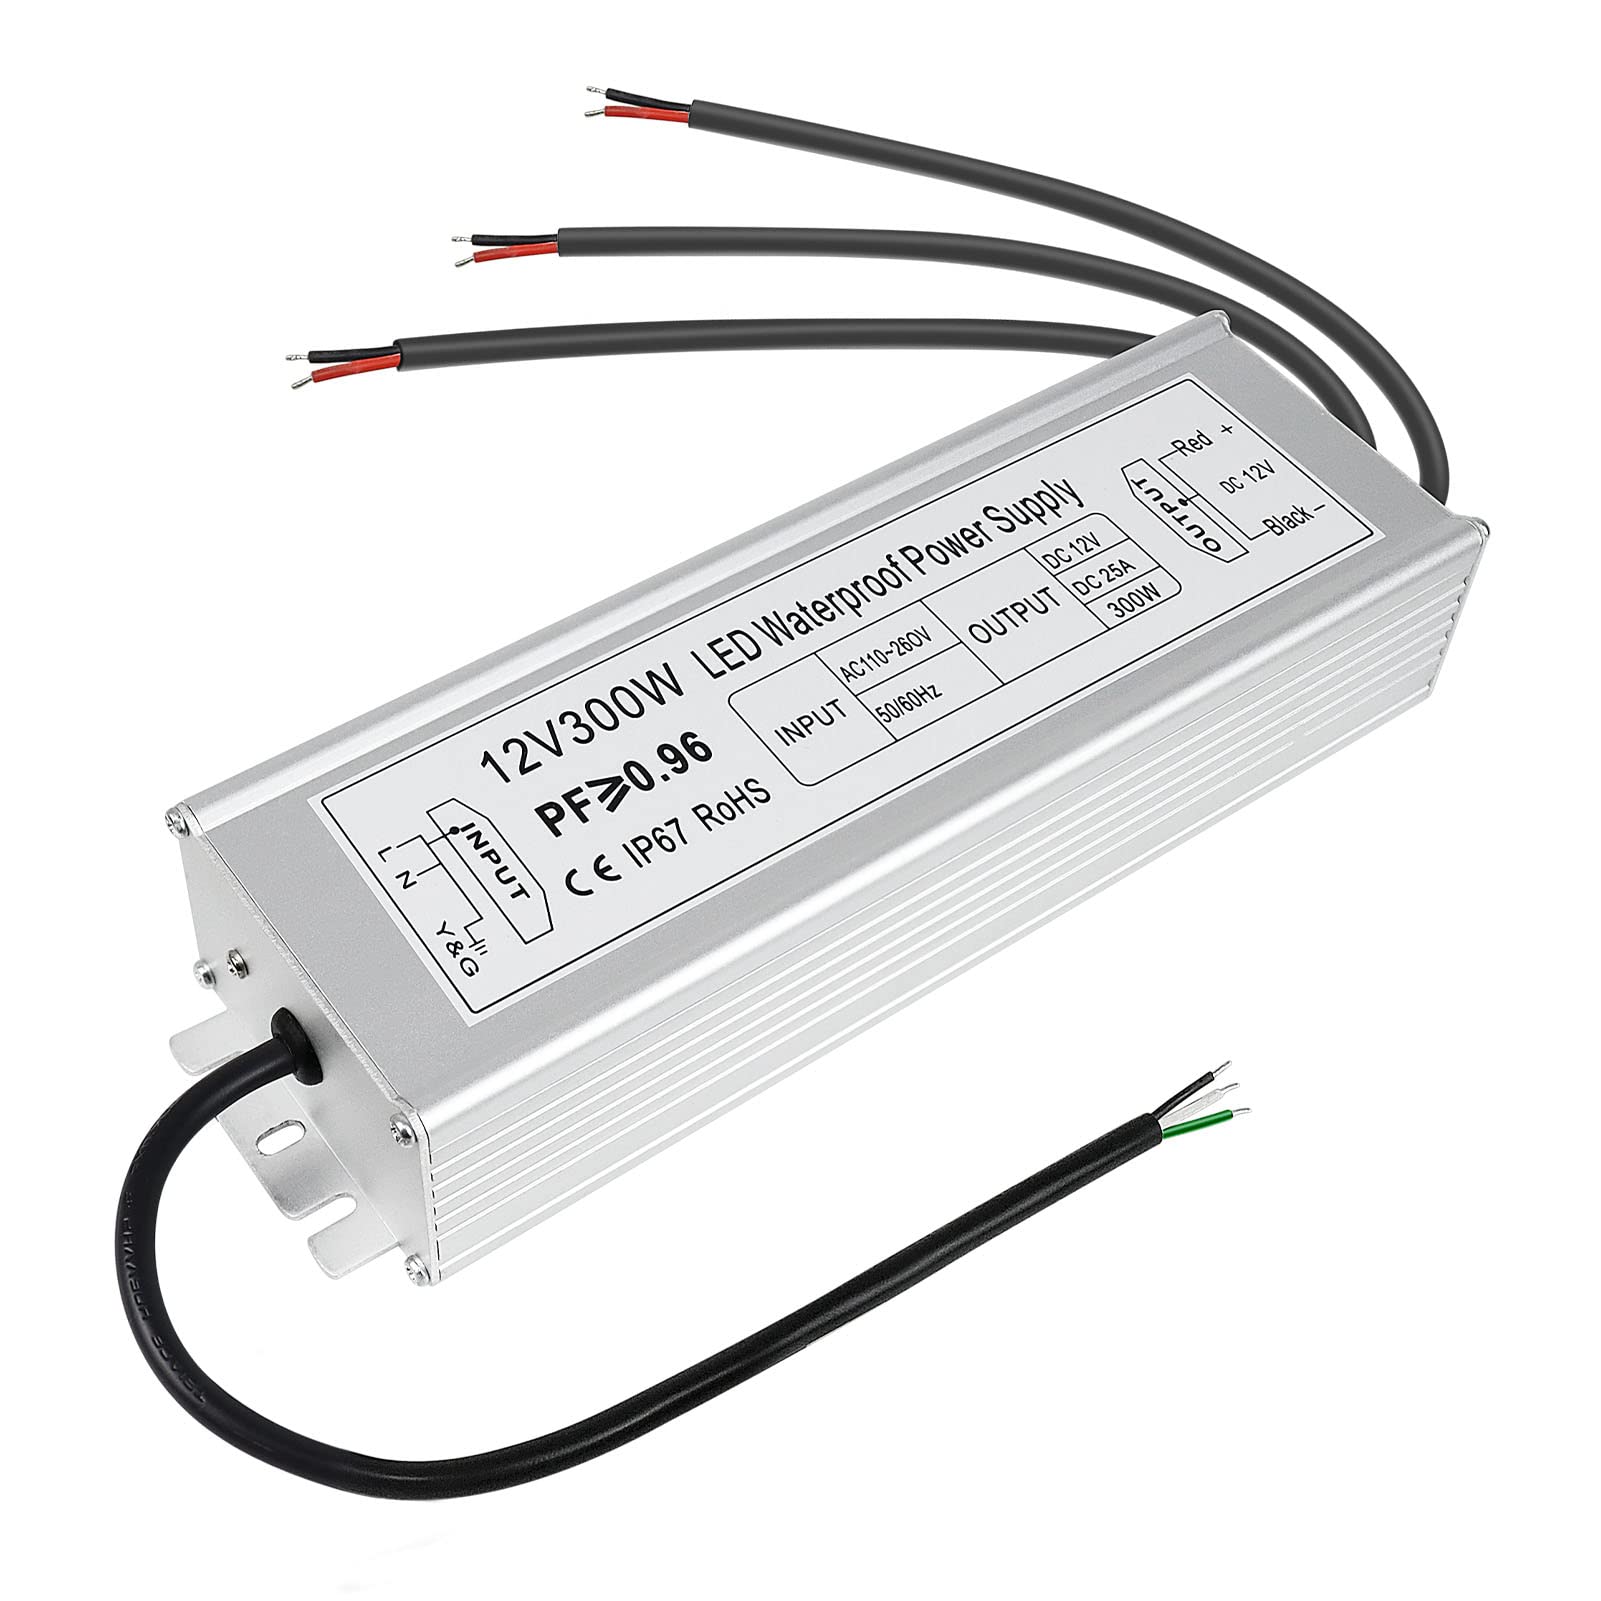 inShareplus 12V 300W LED Power Supply IP67 Waterproof Power Supplies Driver AC 110-260V to DC 12V 25A Low Voltage Output Tr